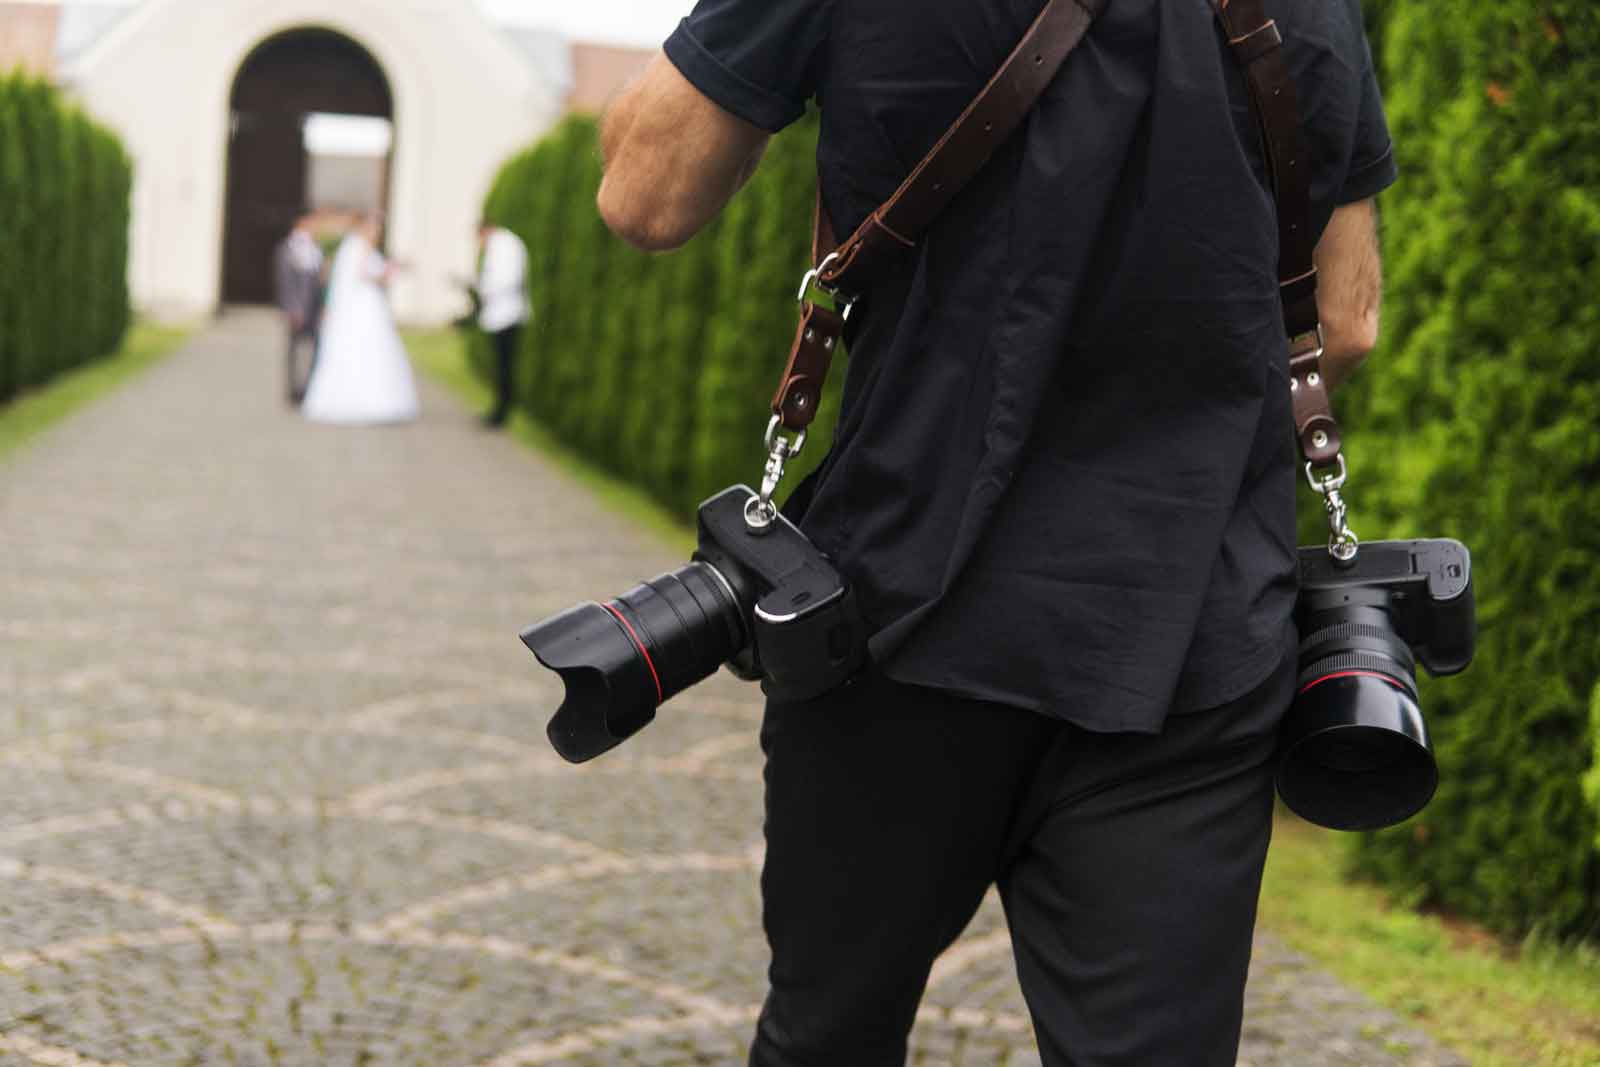 Most Wedding Photographers Are Screwing You